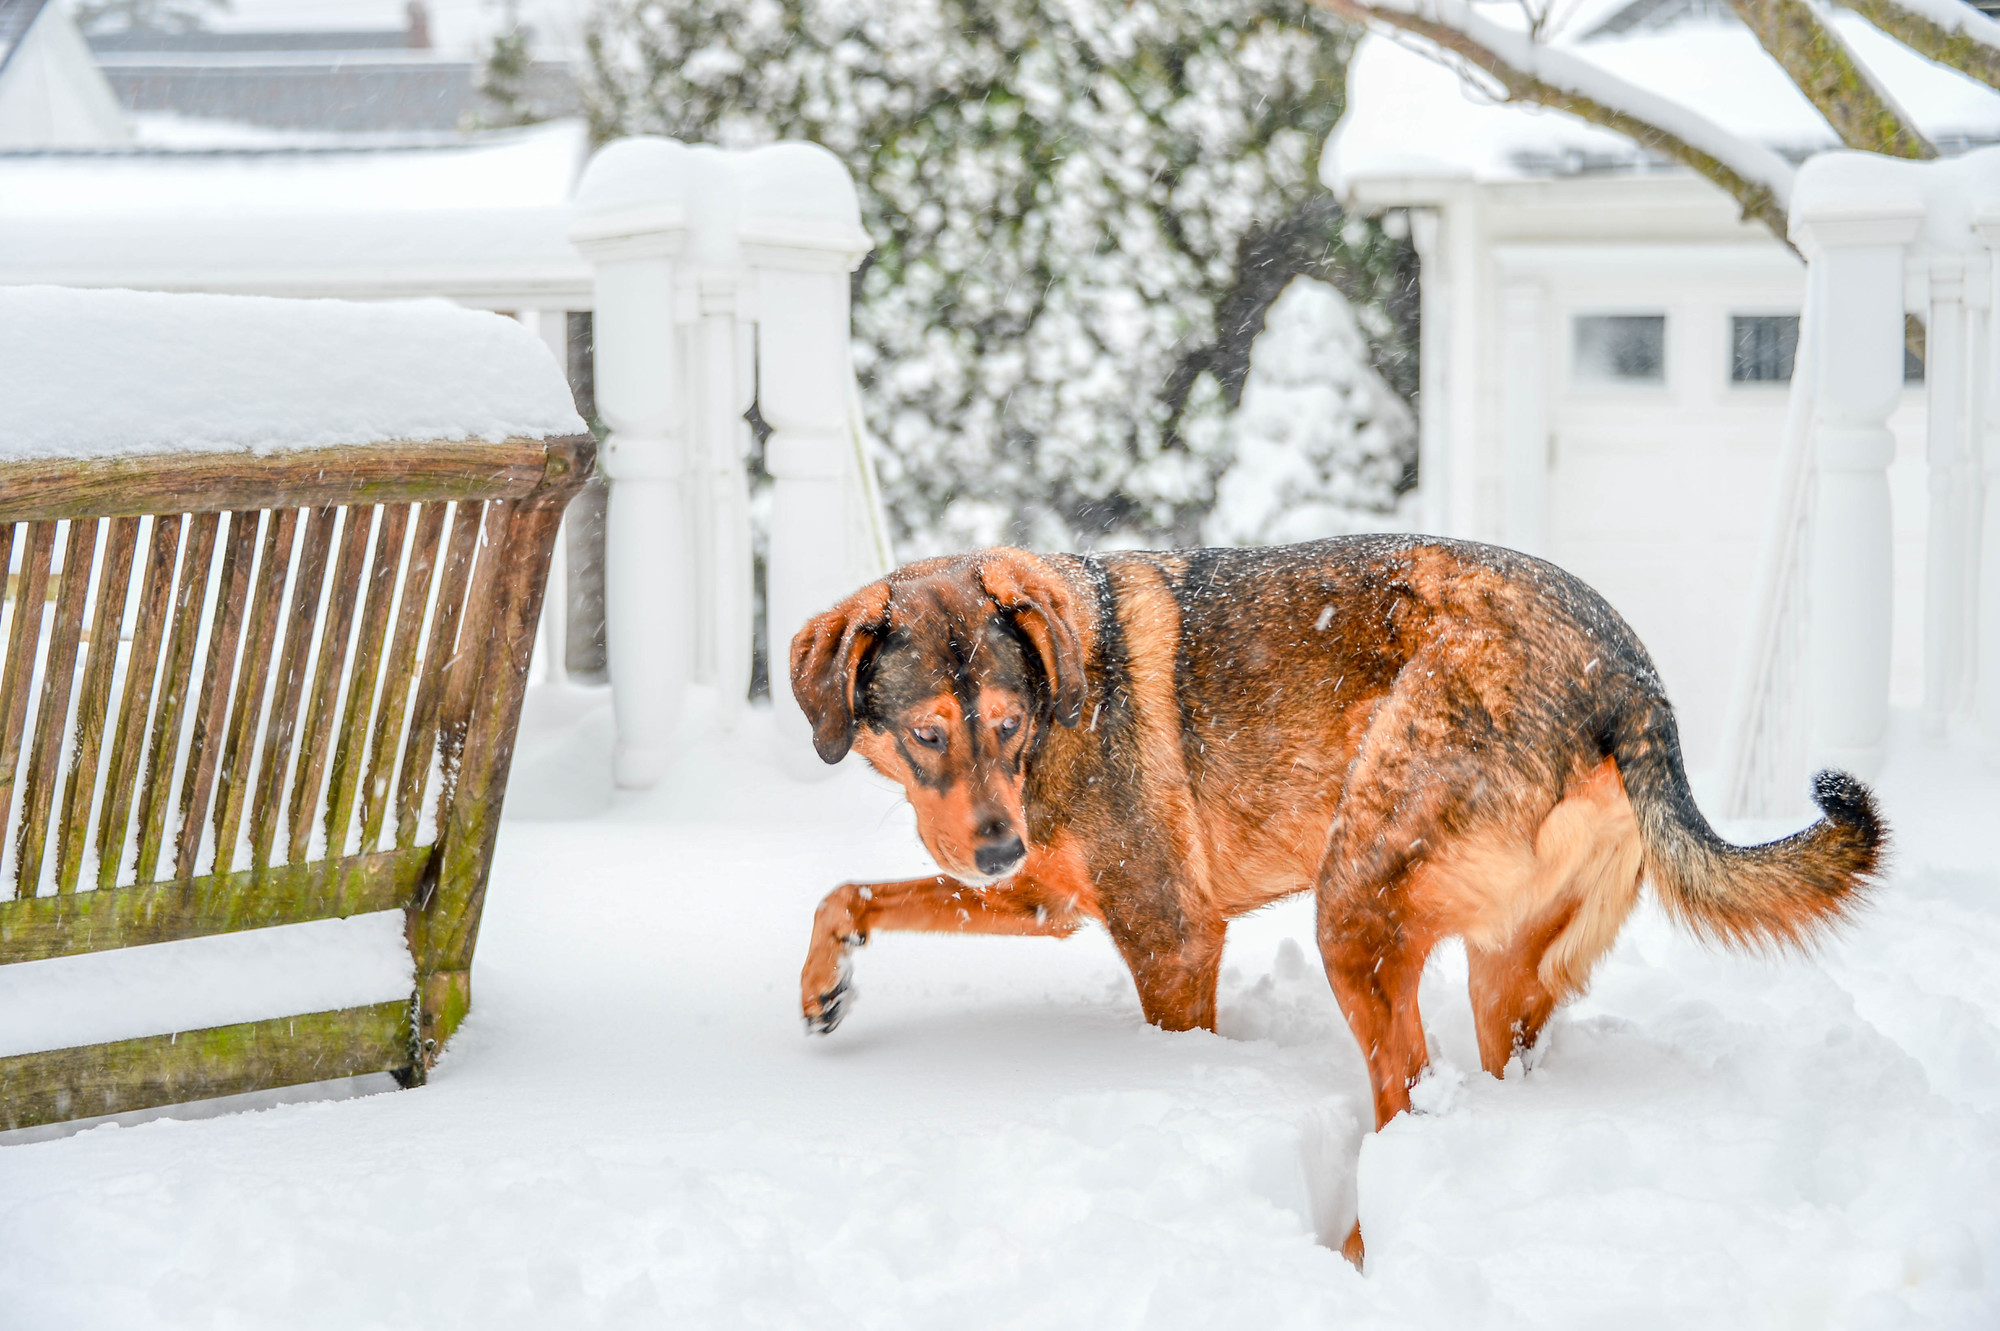 Brody took some tentative steps in the snow last Saturday in Lynbrook.